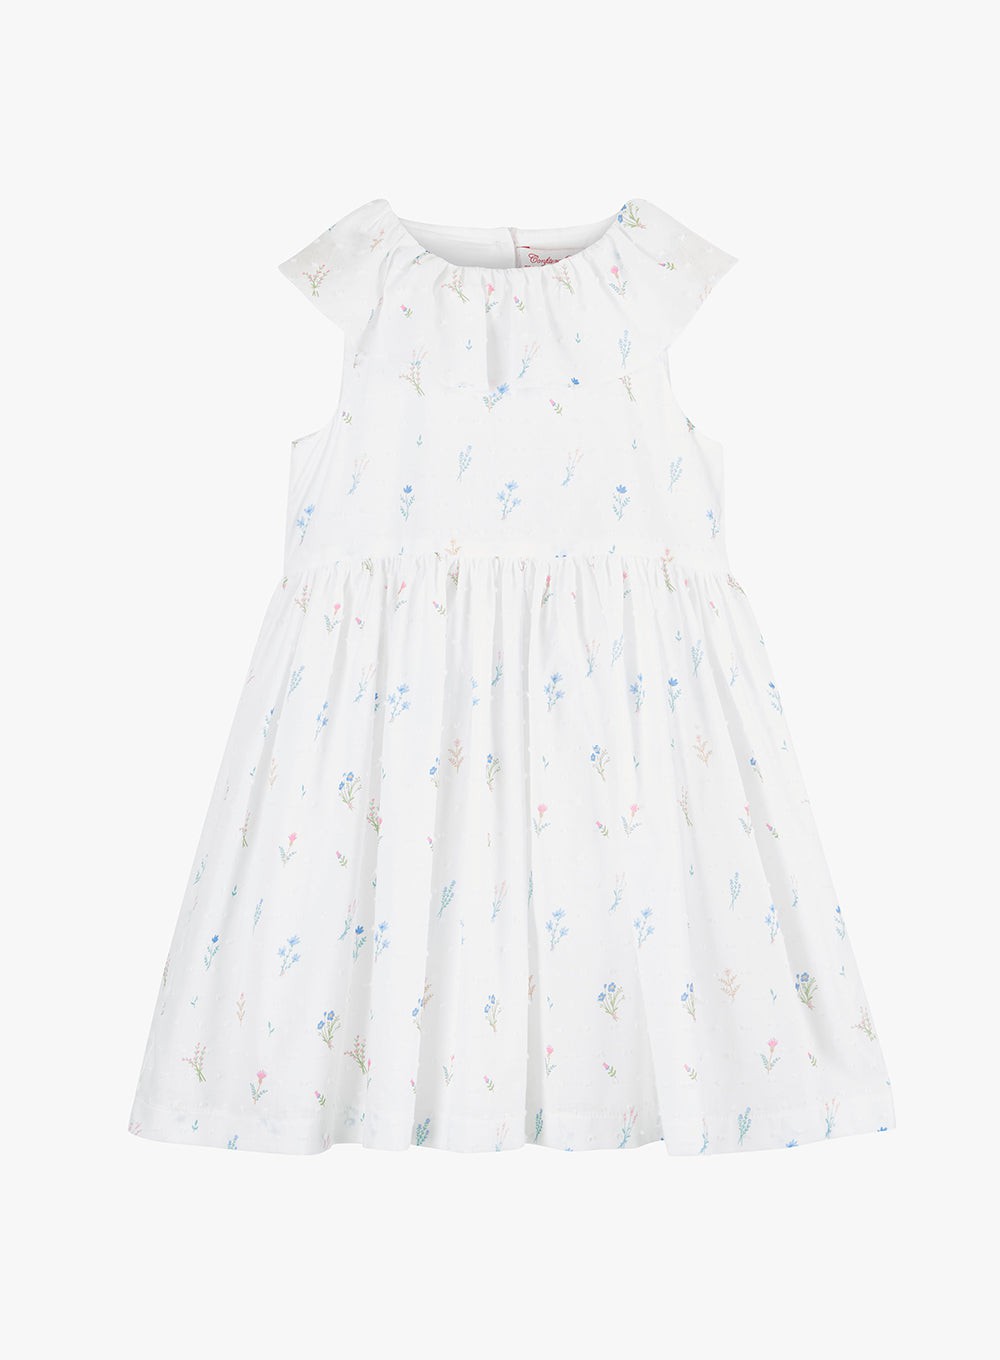 Girls Frances Willow Sun Dress in White Floral | Trotters